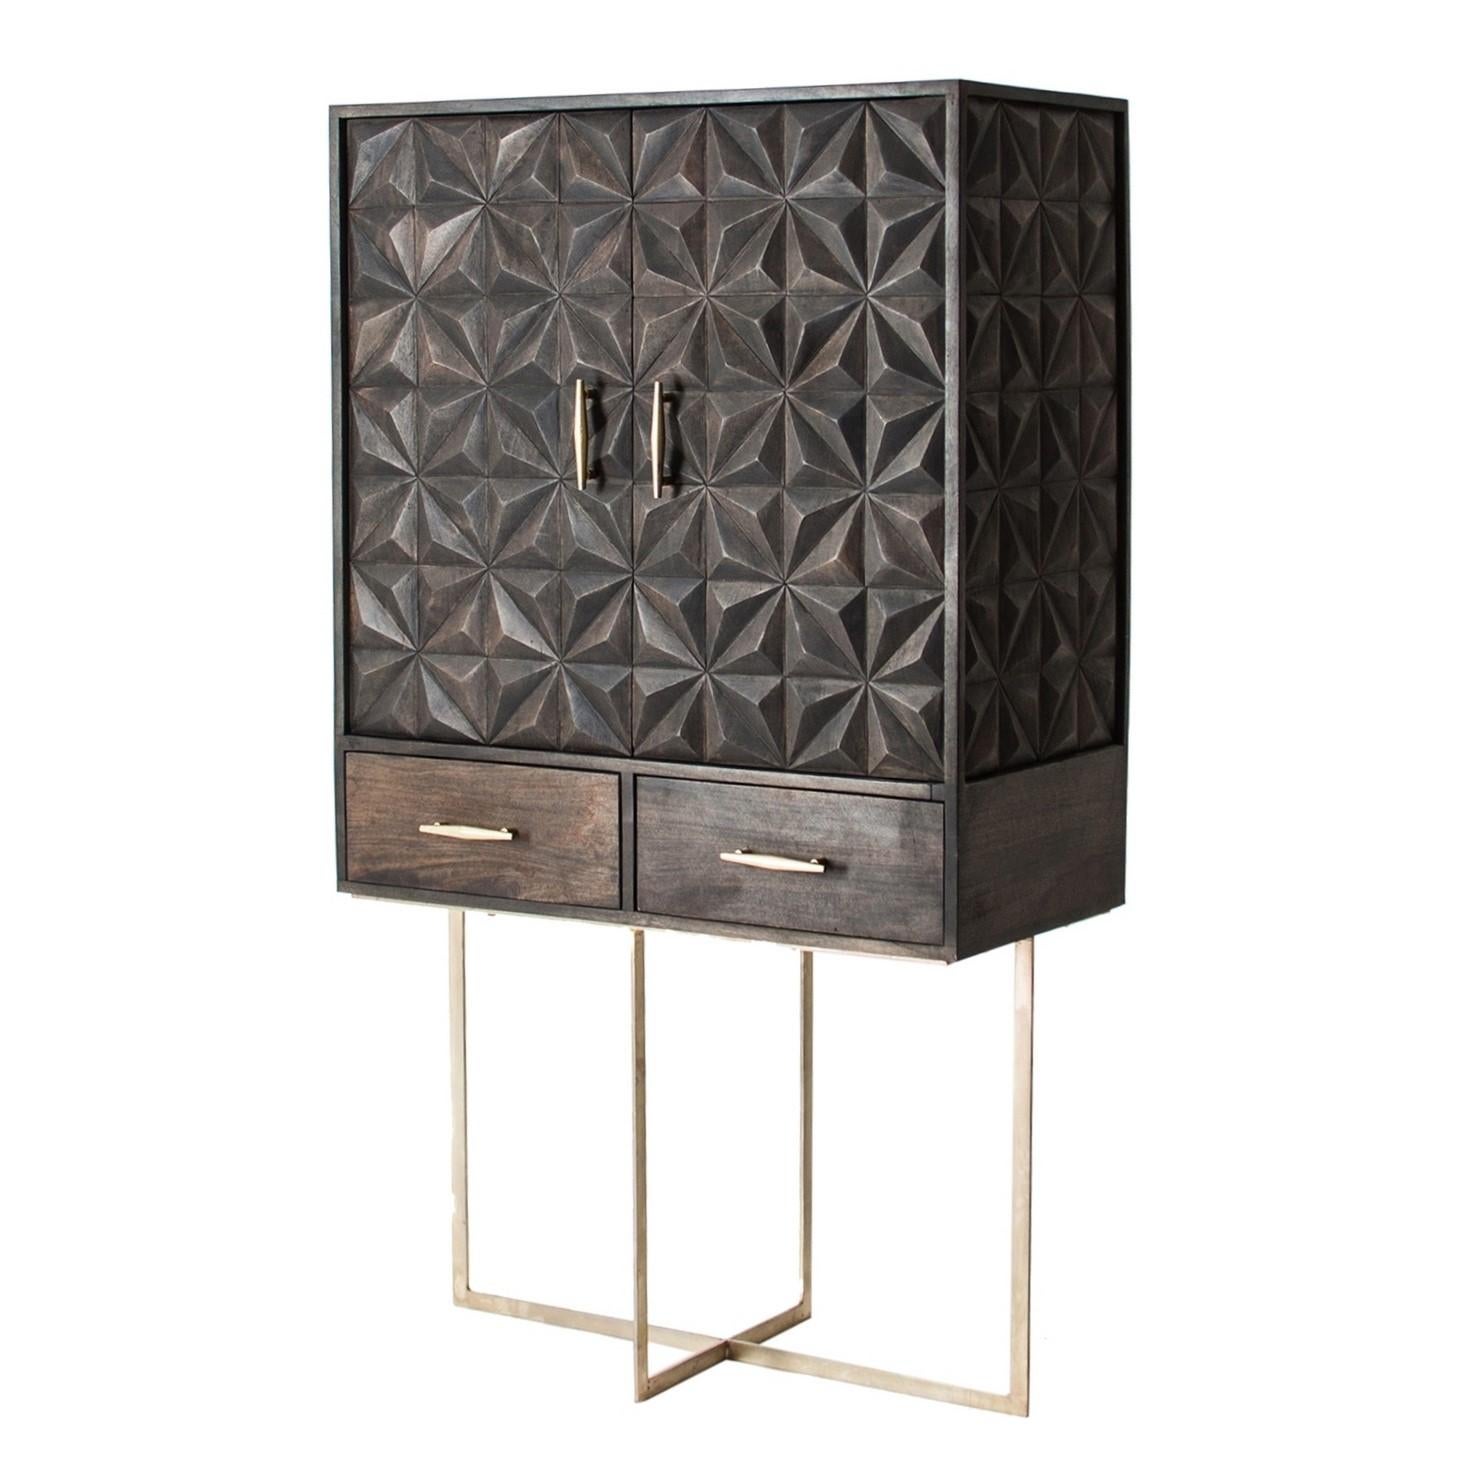 Brutalist dry bar cabinet in wood. An eyecatcher with geometrical and harmonious lines, this cabinet is composed of 2 large graphic door panels opening on storage compartments and 2 drawers, adorned with gilded metal feet.